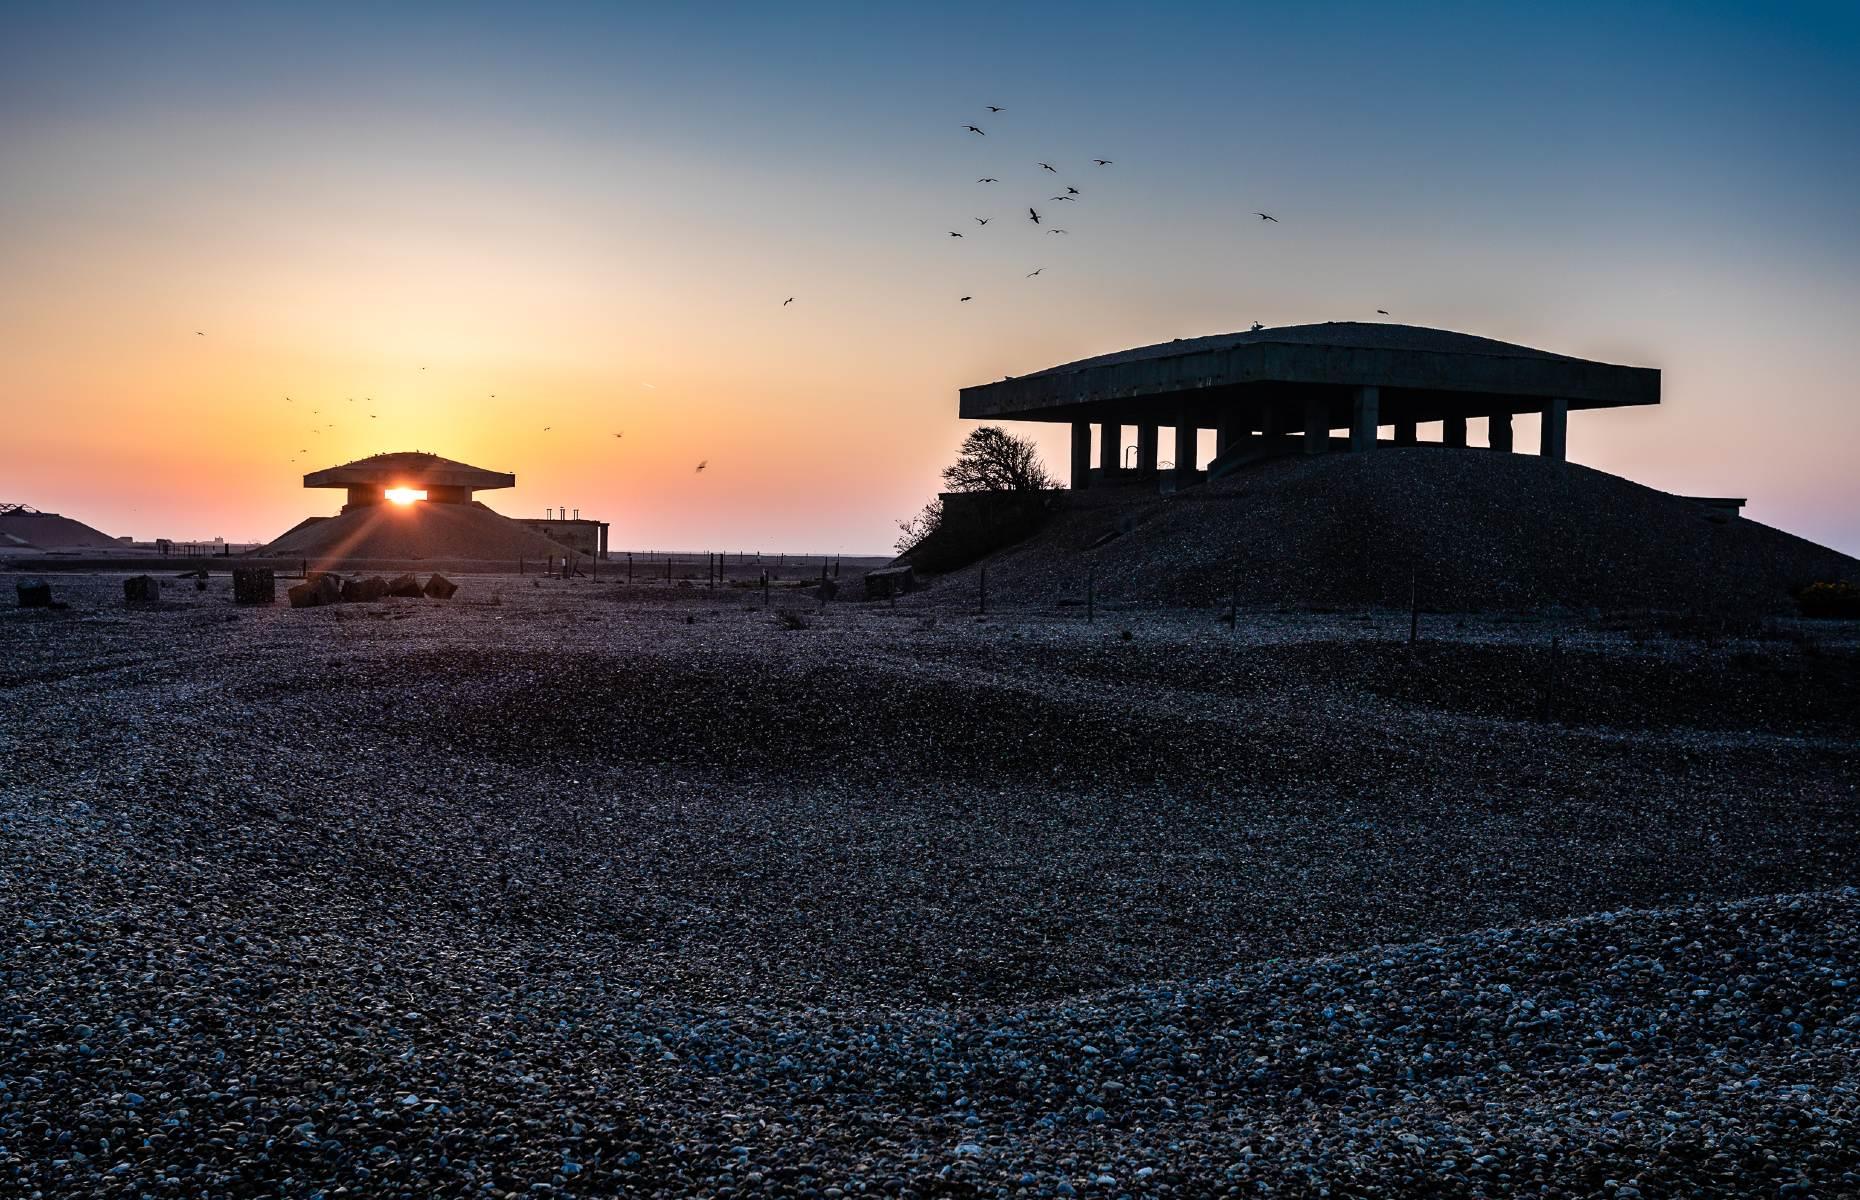 During the Cold War, Orford Ness was used as a site for developing atomic bombs – these two 'pagodas' were used for testing the components of these nuclear weapons. Today, the disused site has become a landmark on the Suffolk coast and it's beautifully captured in this sunrise shot by London-based photographer Martin Chamberlain.